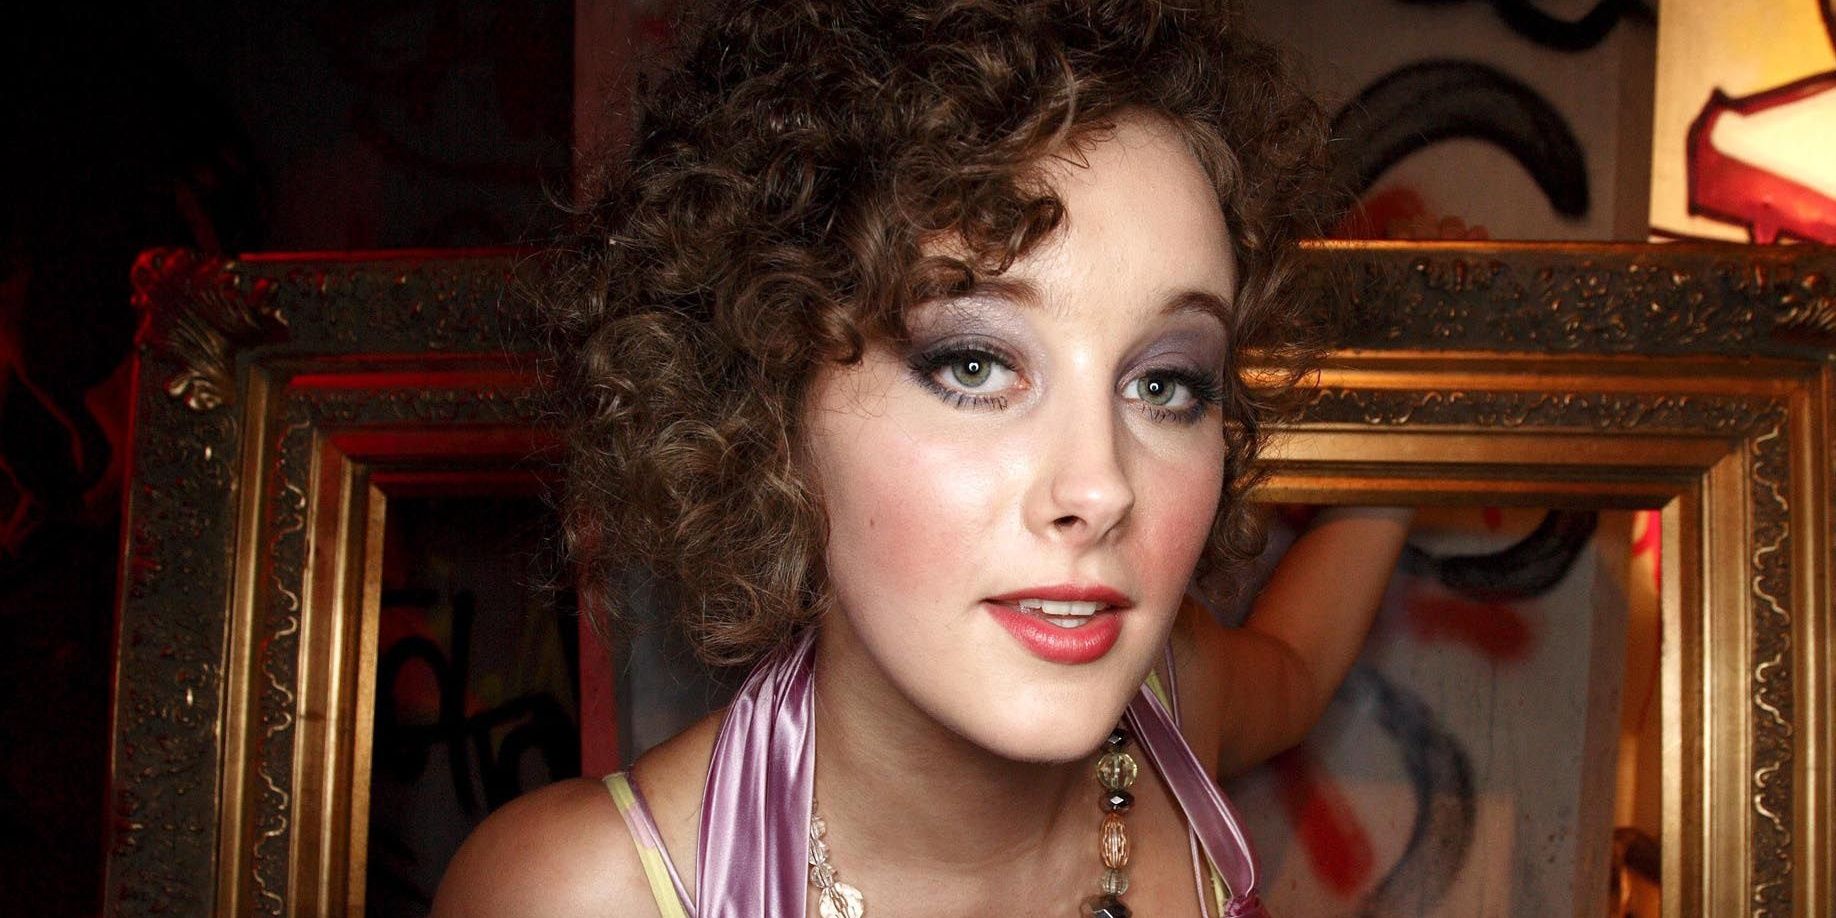 Michelle from Skins looks into the camera